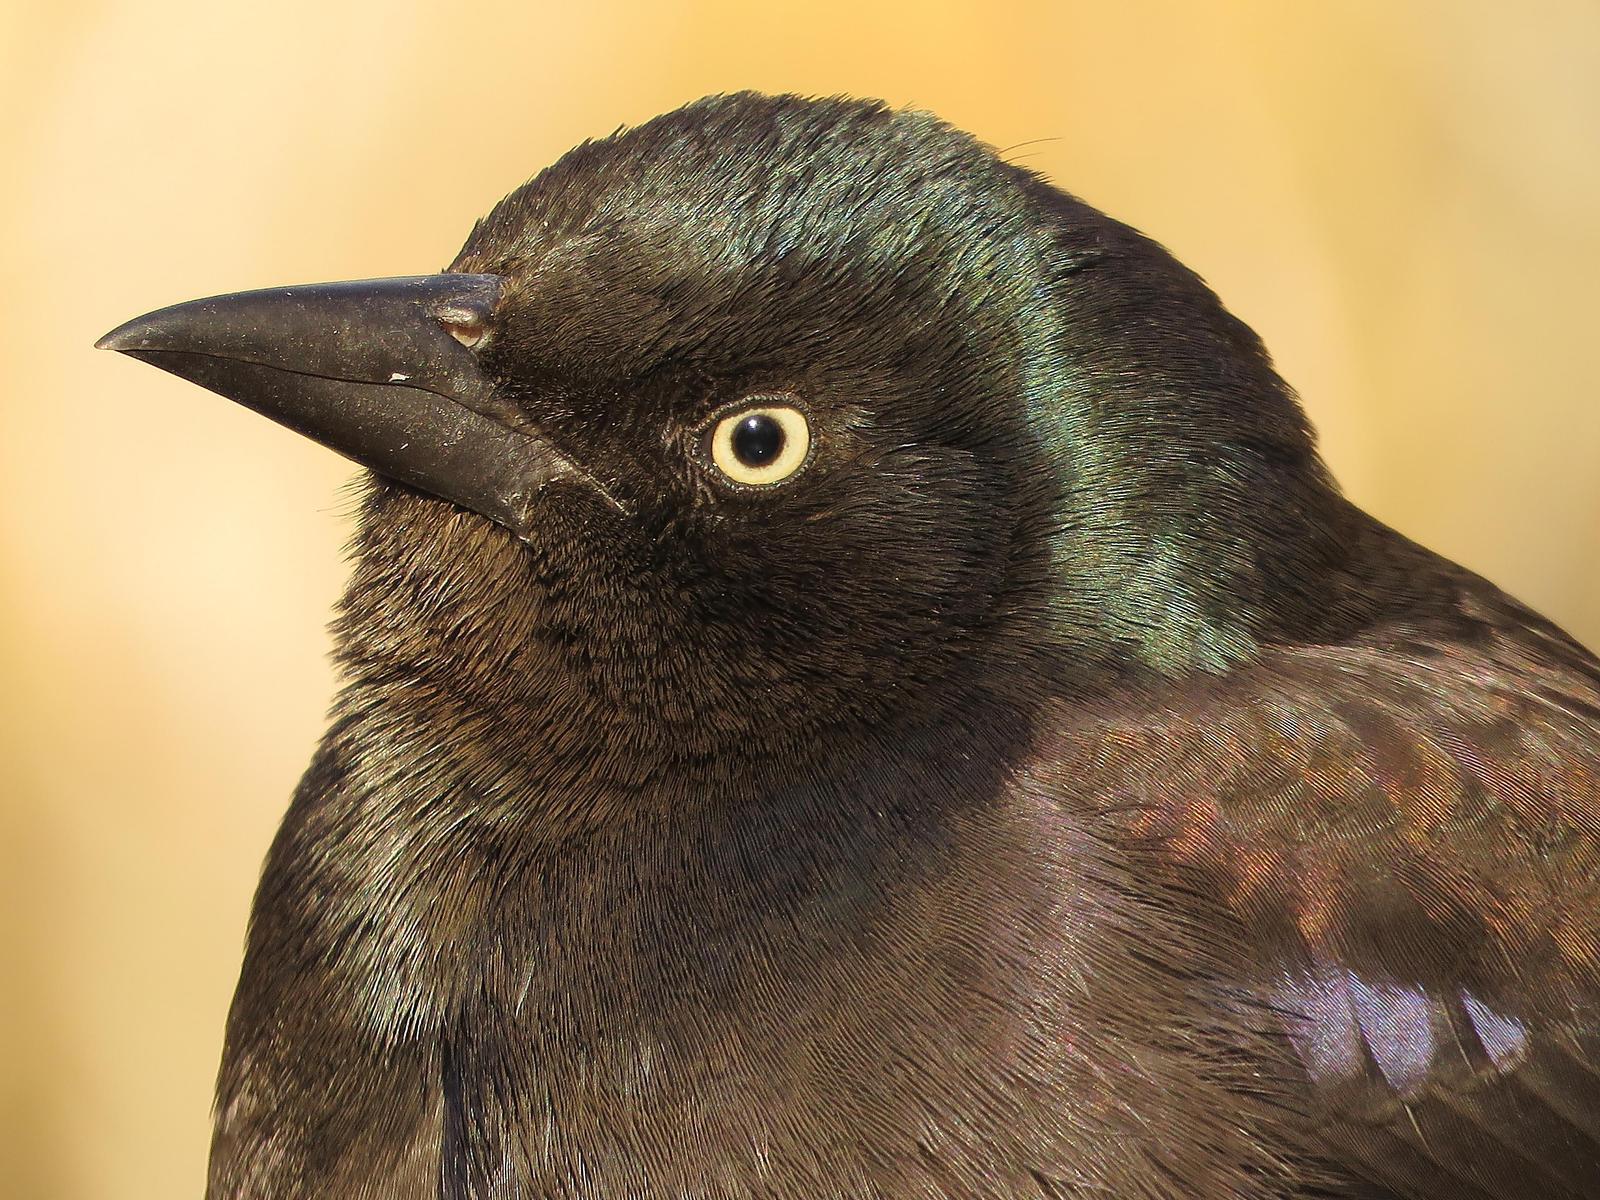 Common Grackle Photo by Bob Neugebauer